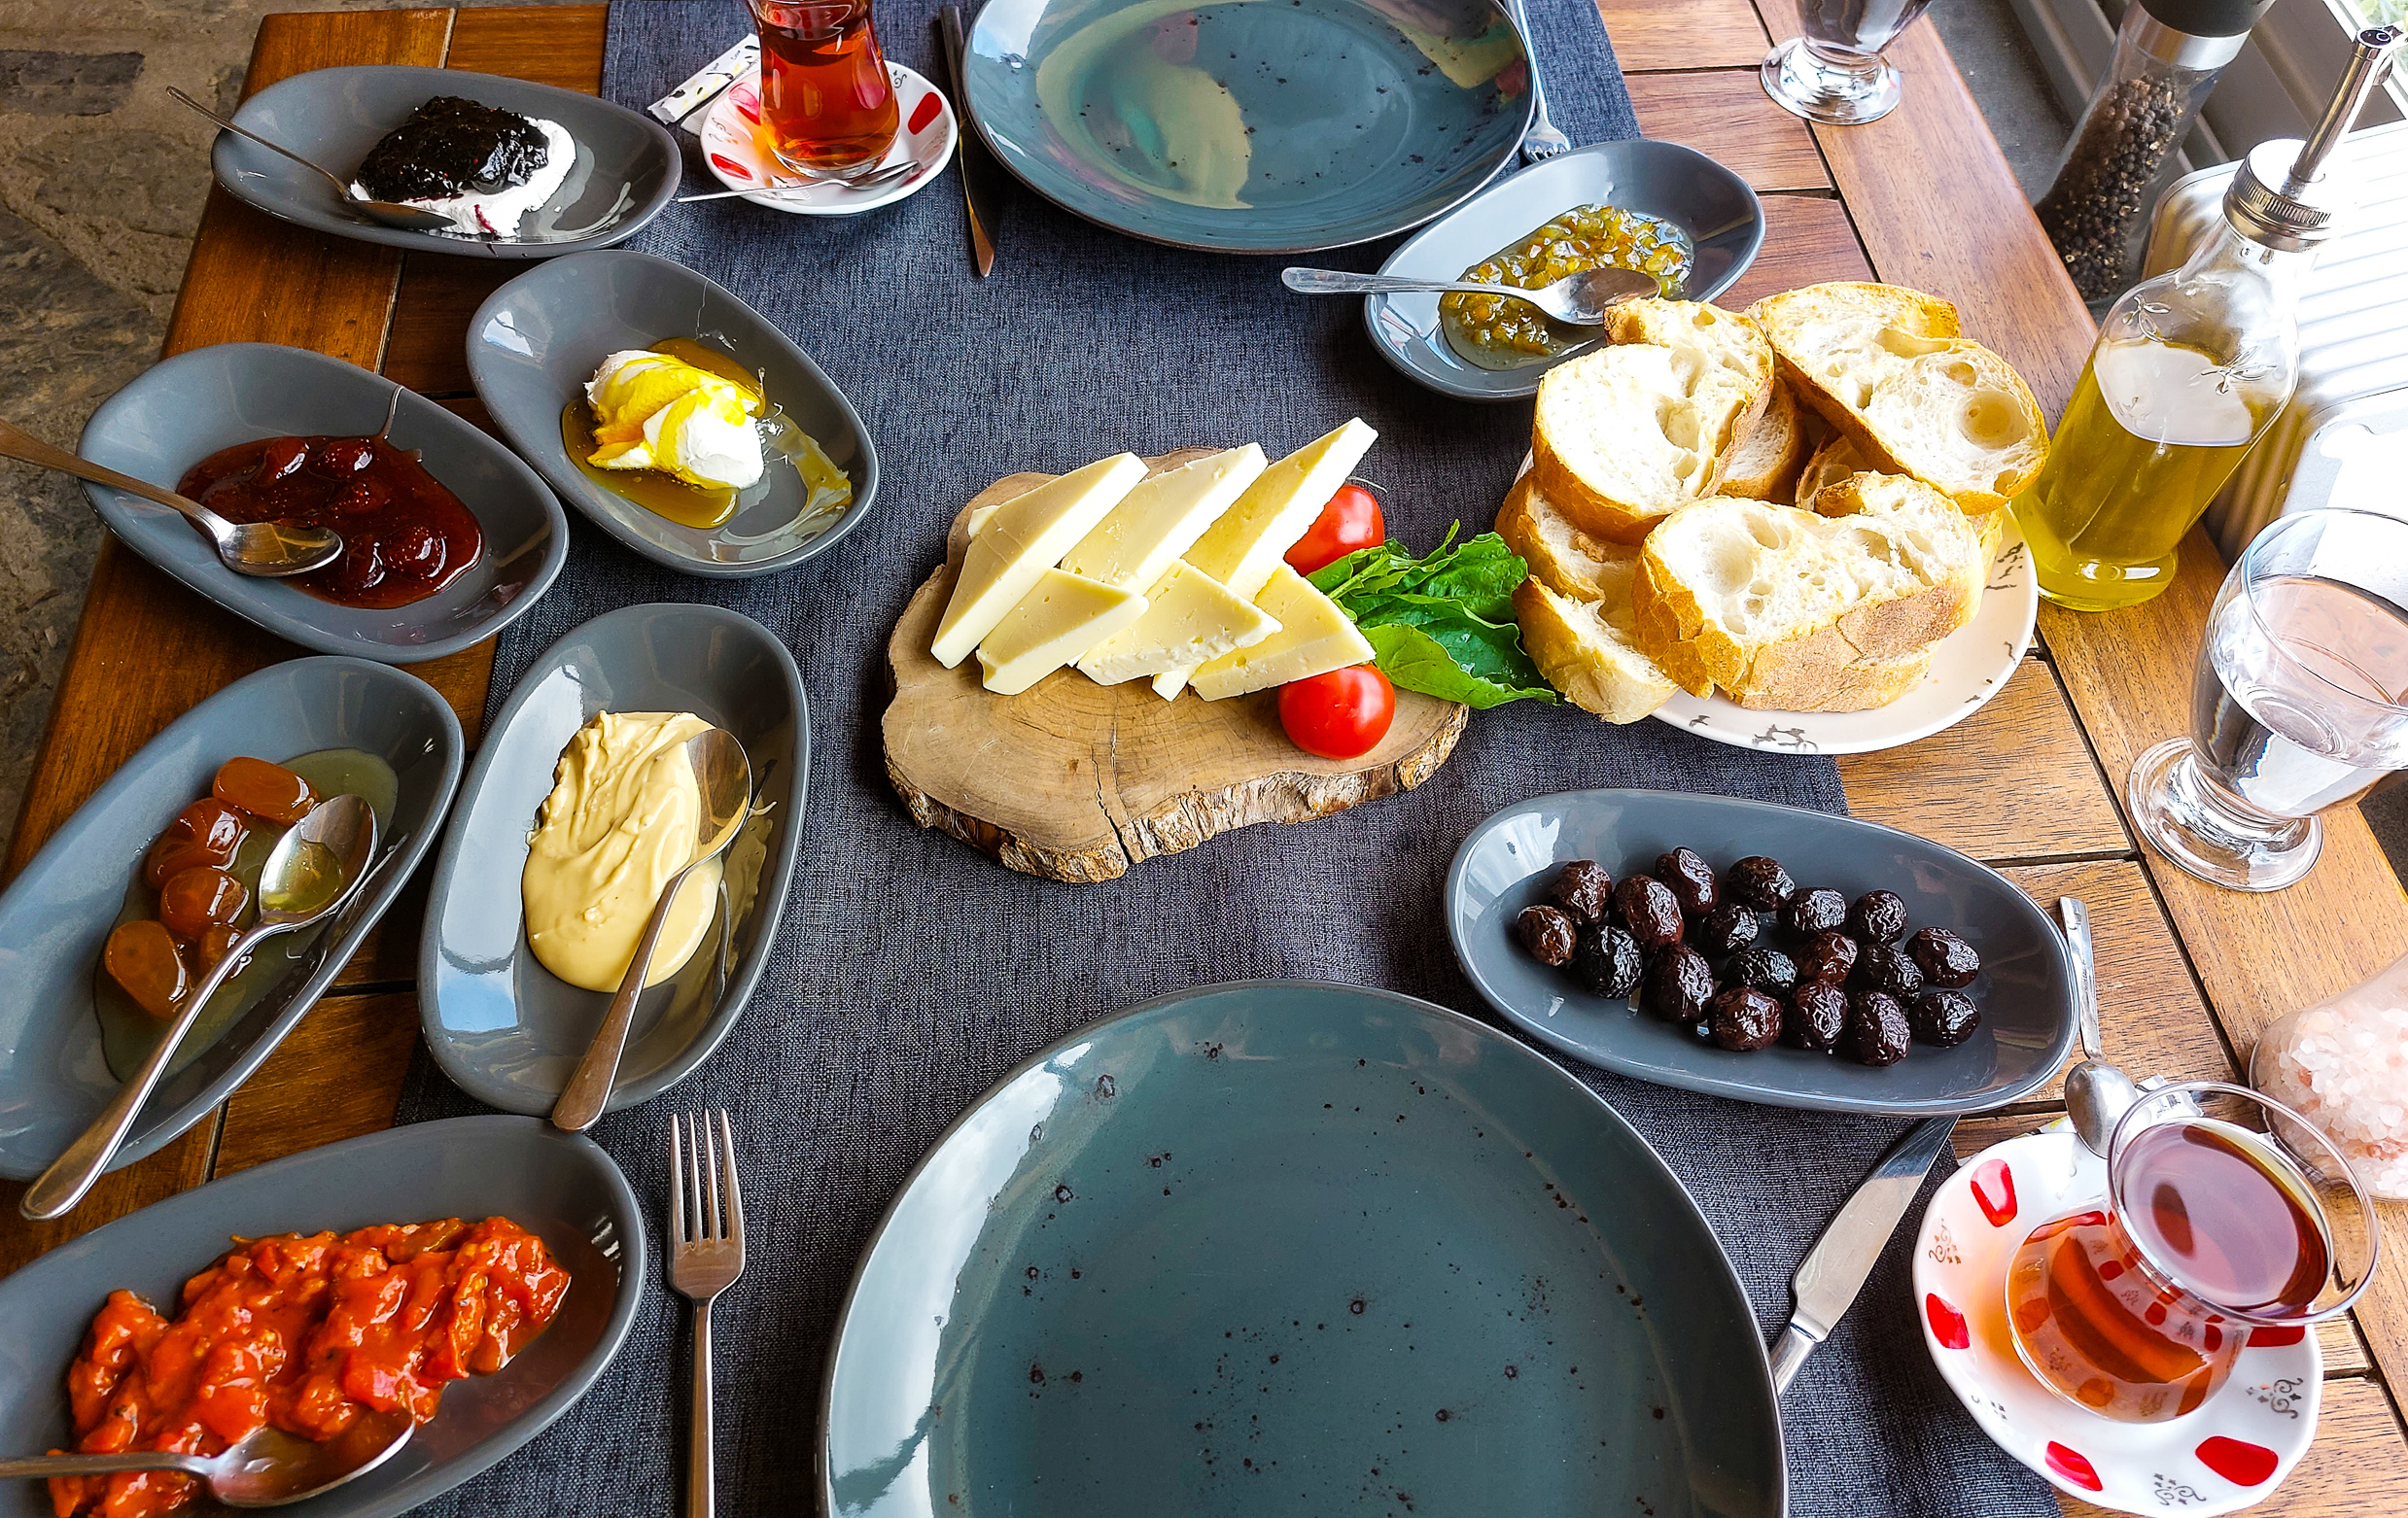 <span  class="uc_style_uc_tiles_grid_image_elementor_uc_items_attribute_title" style="color:#FFFFFF;">This is how a traditional turkish breakfast can look like (plenty of stuff on the table)</span>